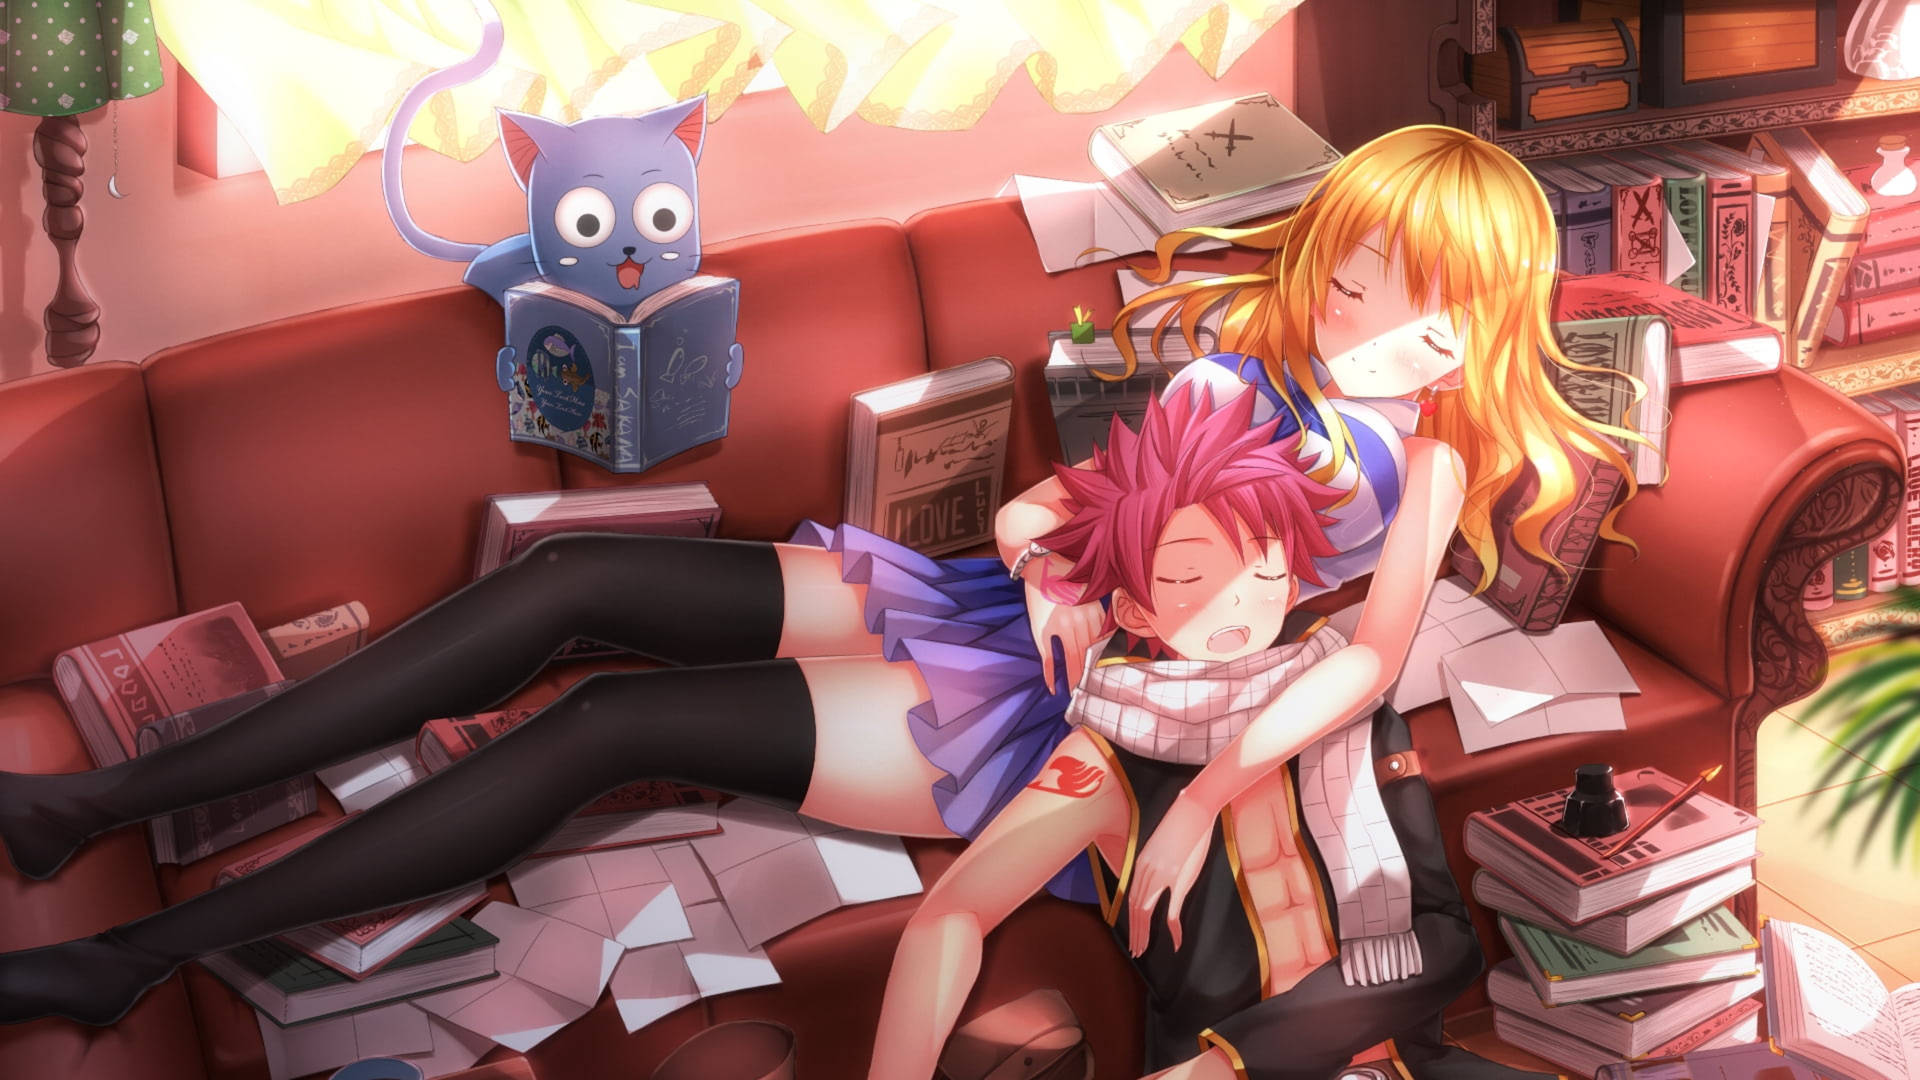 Cute Anime Couple Sleeping On Couch Background